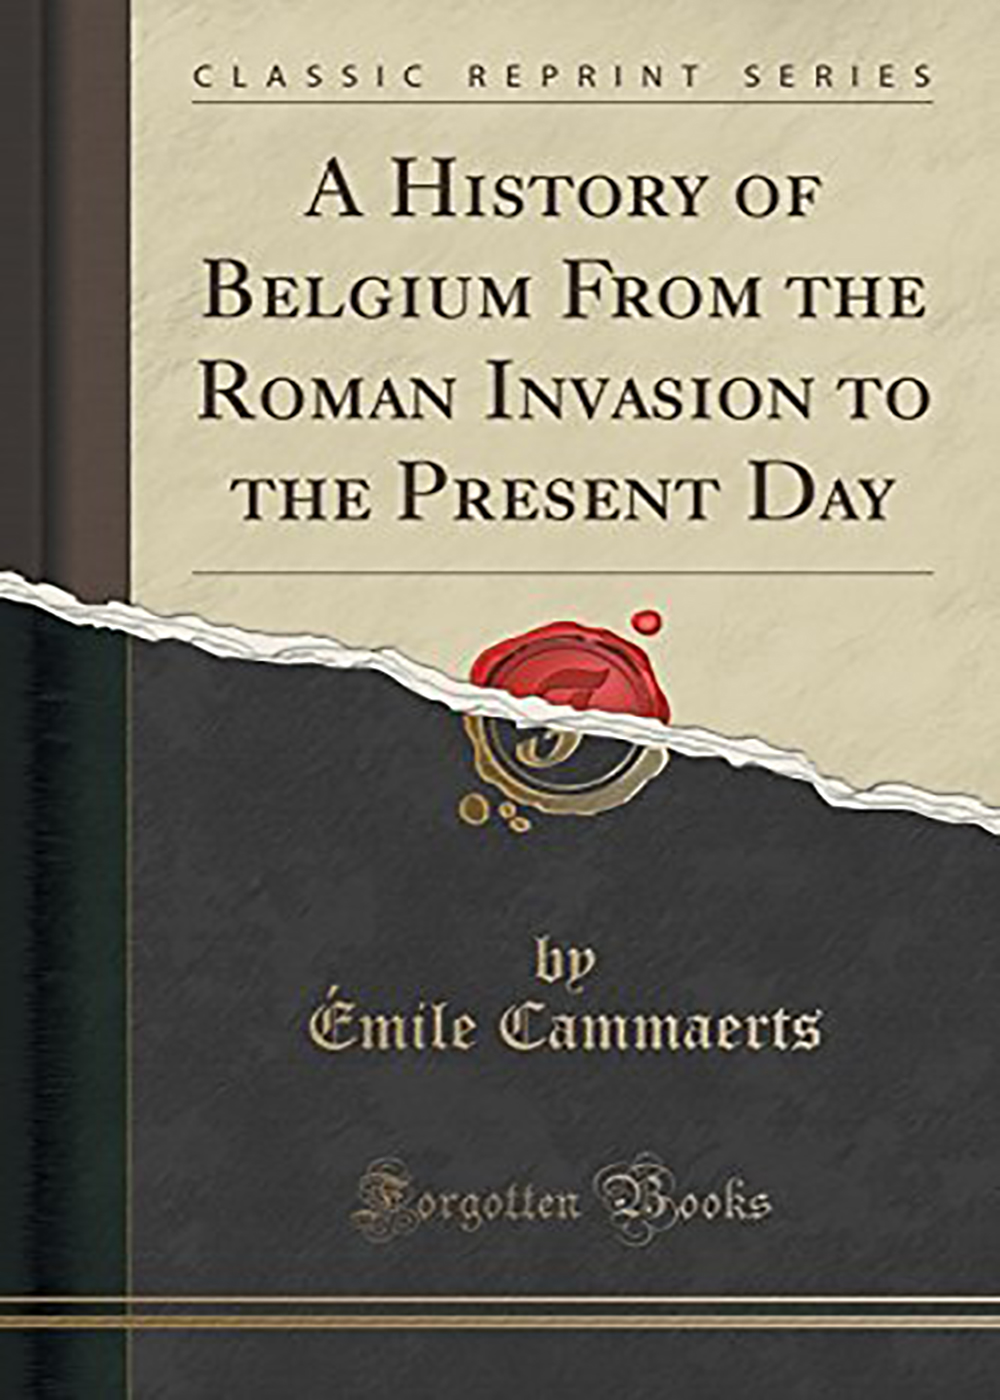 Emile Cammaerts - Belgium From The Roman Invasion To The Present Day